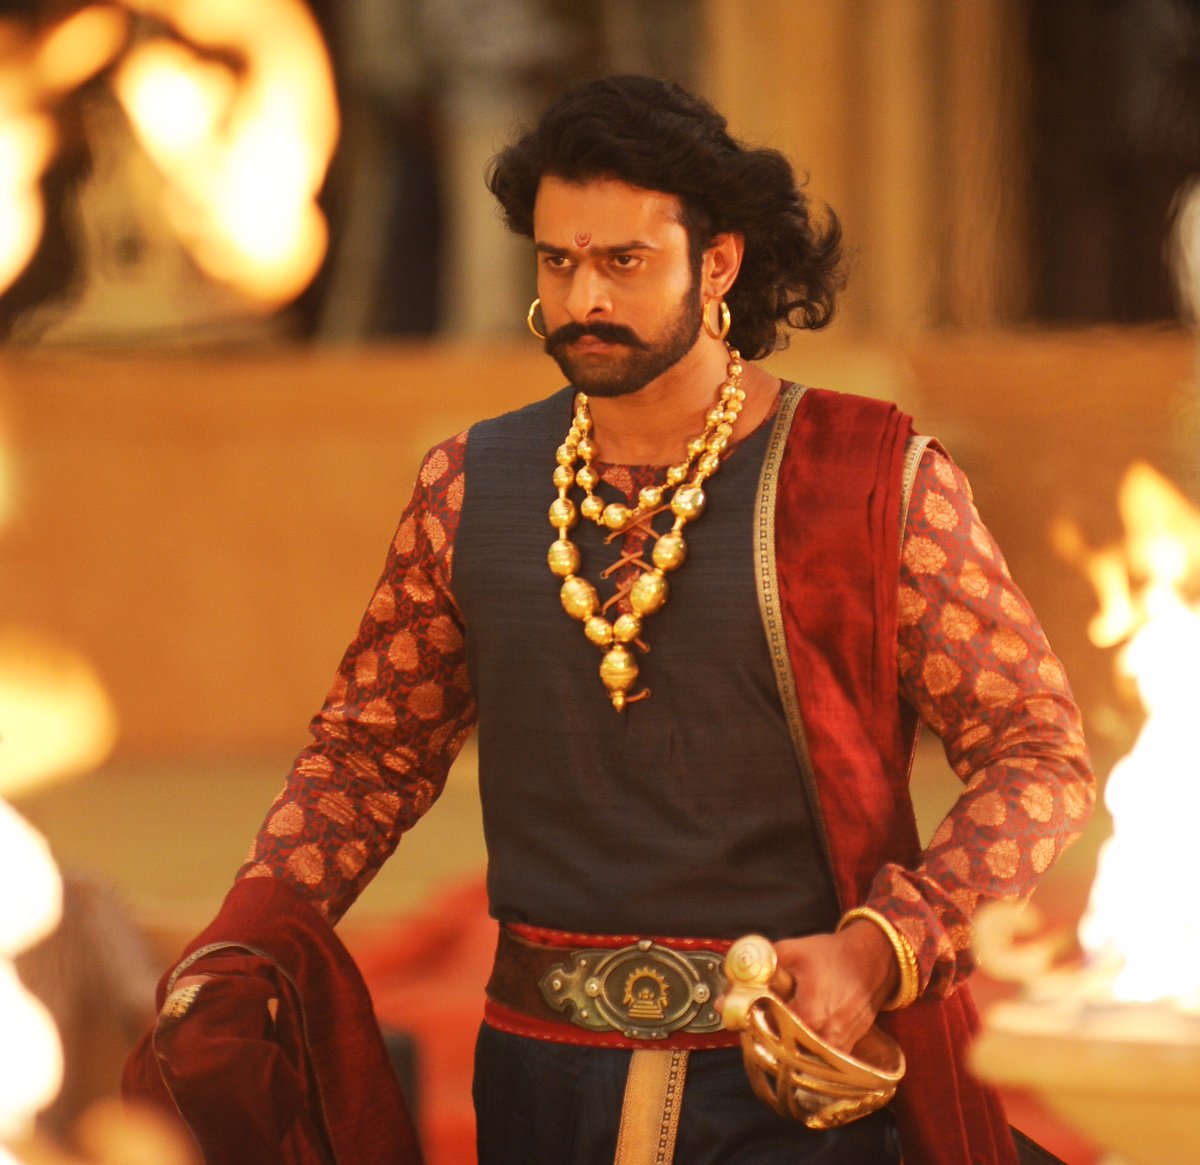 Prabhas Latest Full HD Pics Photos Images & Wallpapers